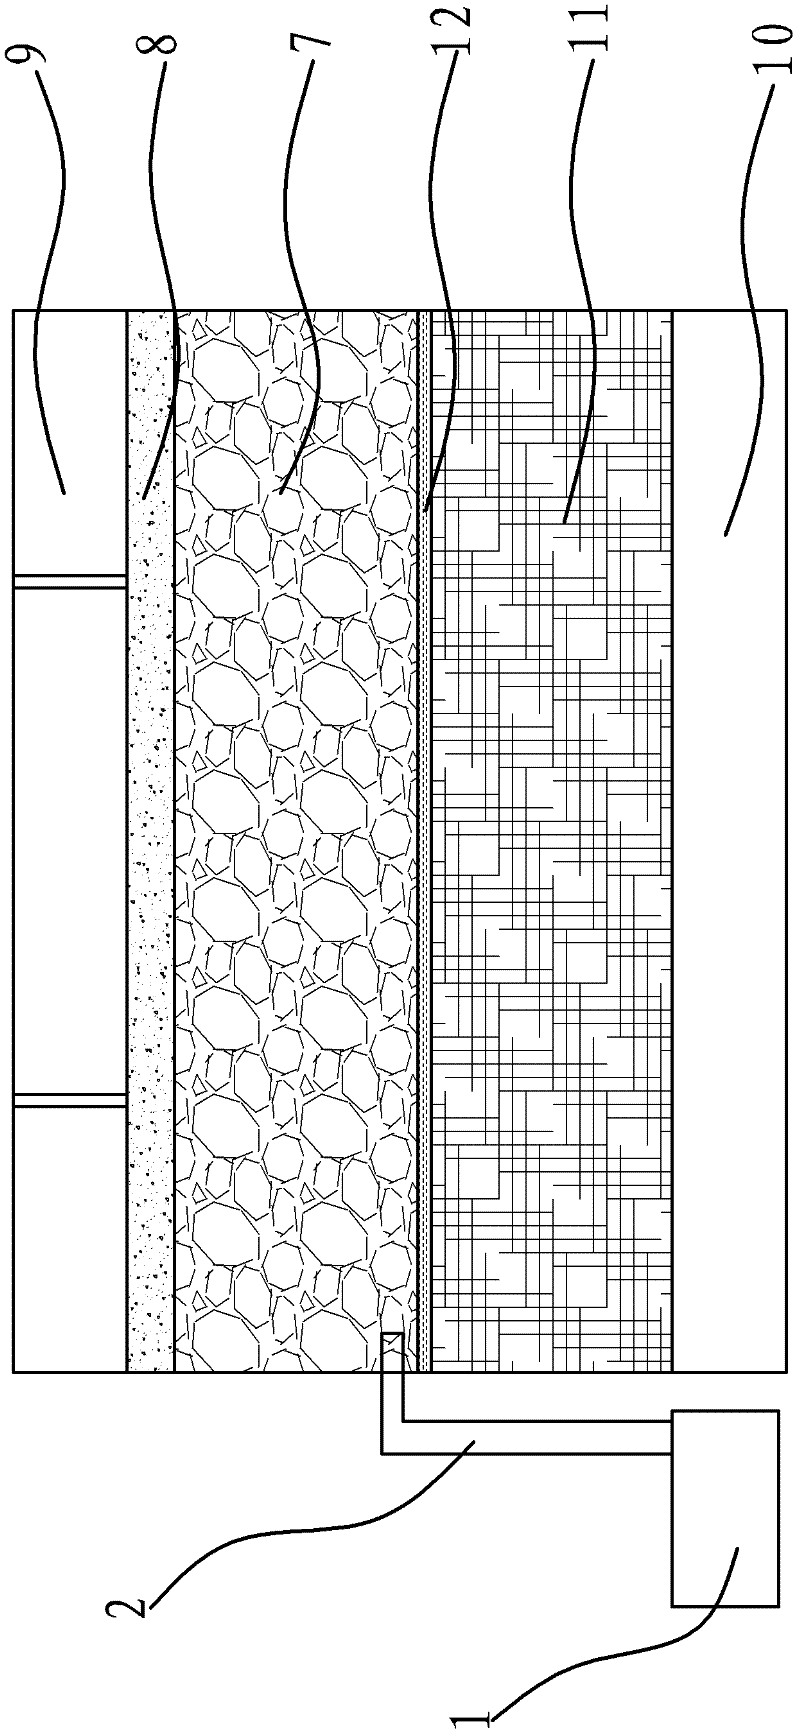 Ecological permeable stratal configuration